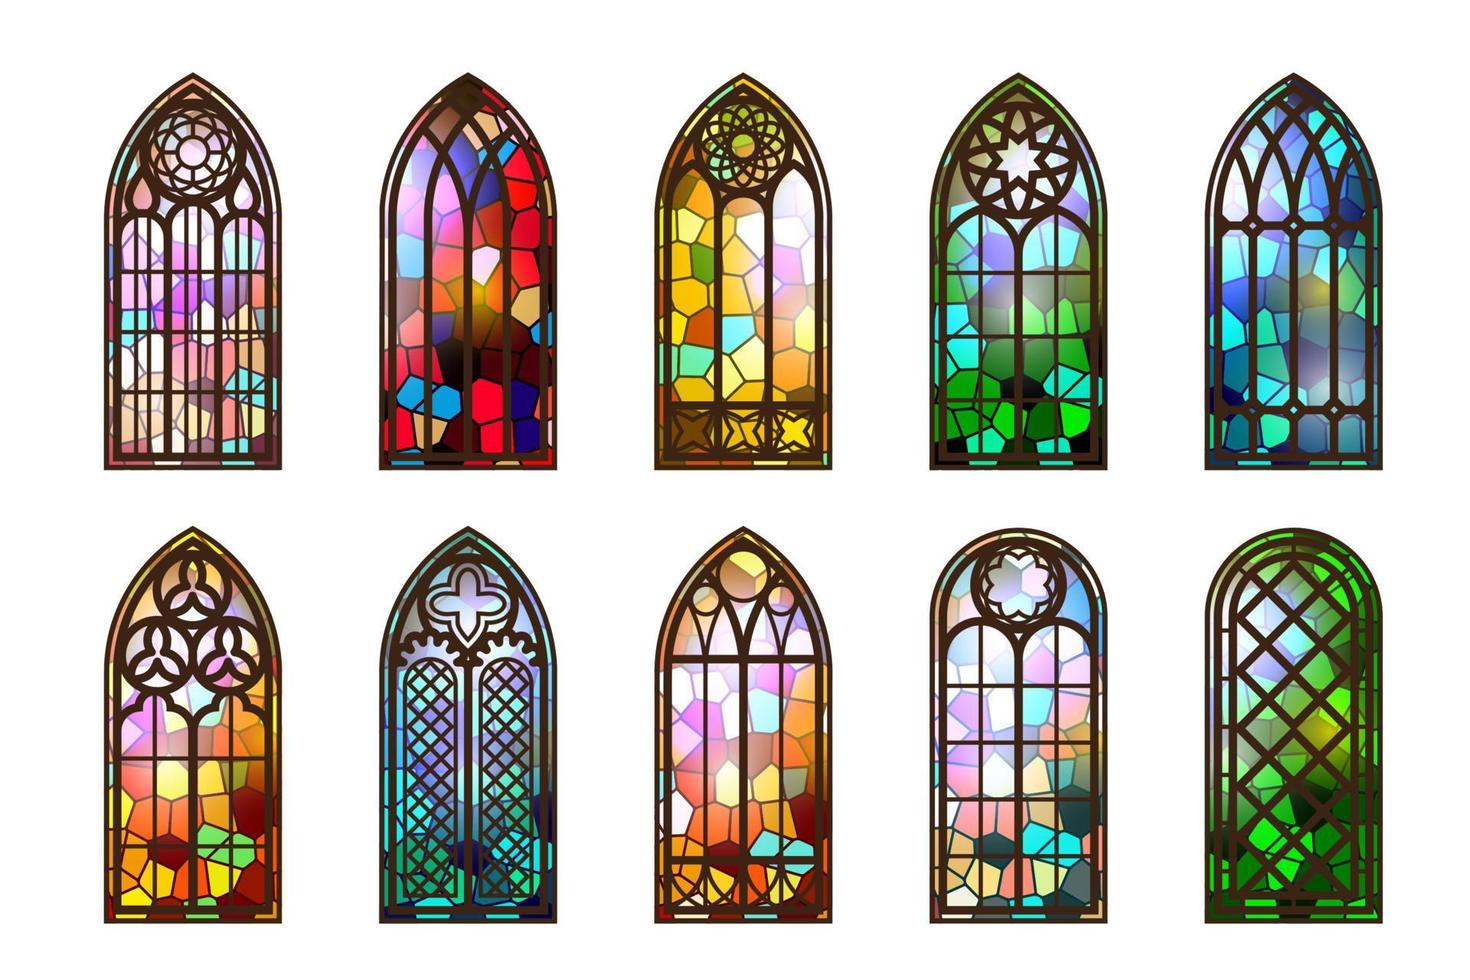 https://static.vecteezy.com/system/resources/previews/021/219/506/non_2x/gothic-stained-glass-windows-church-medieval-arches-catholic-cathedral-mosaic-frames-old-architecture-design-set-vector.jpg